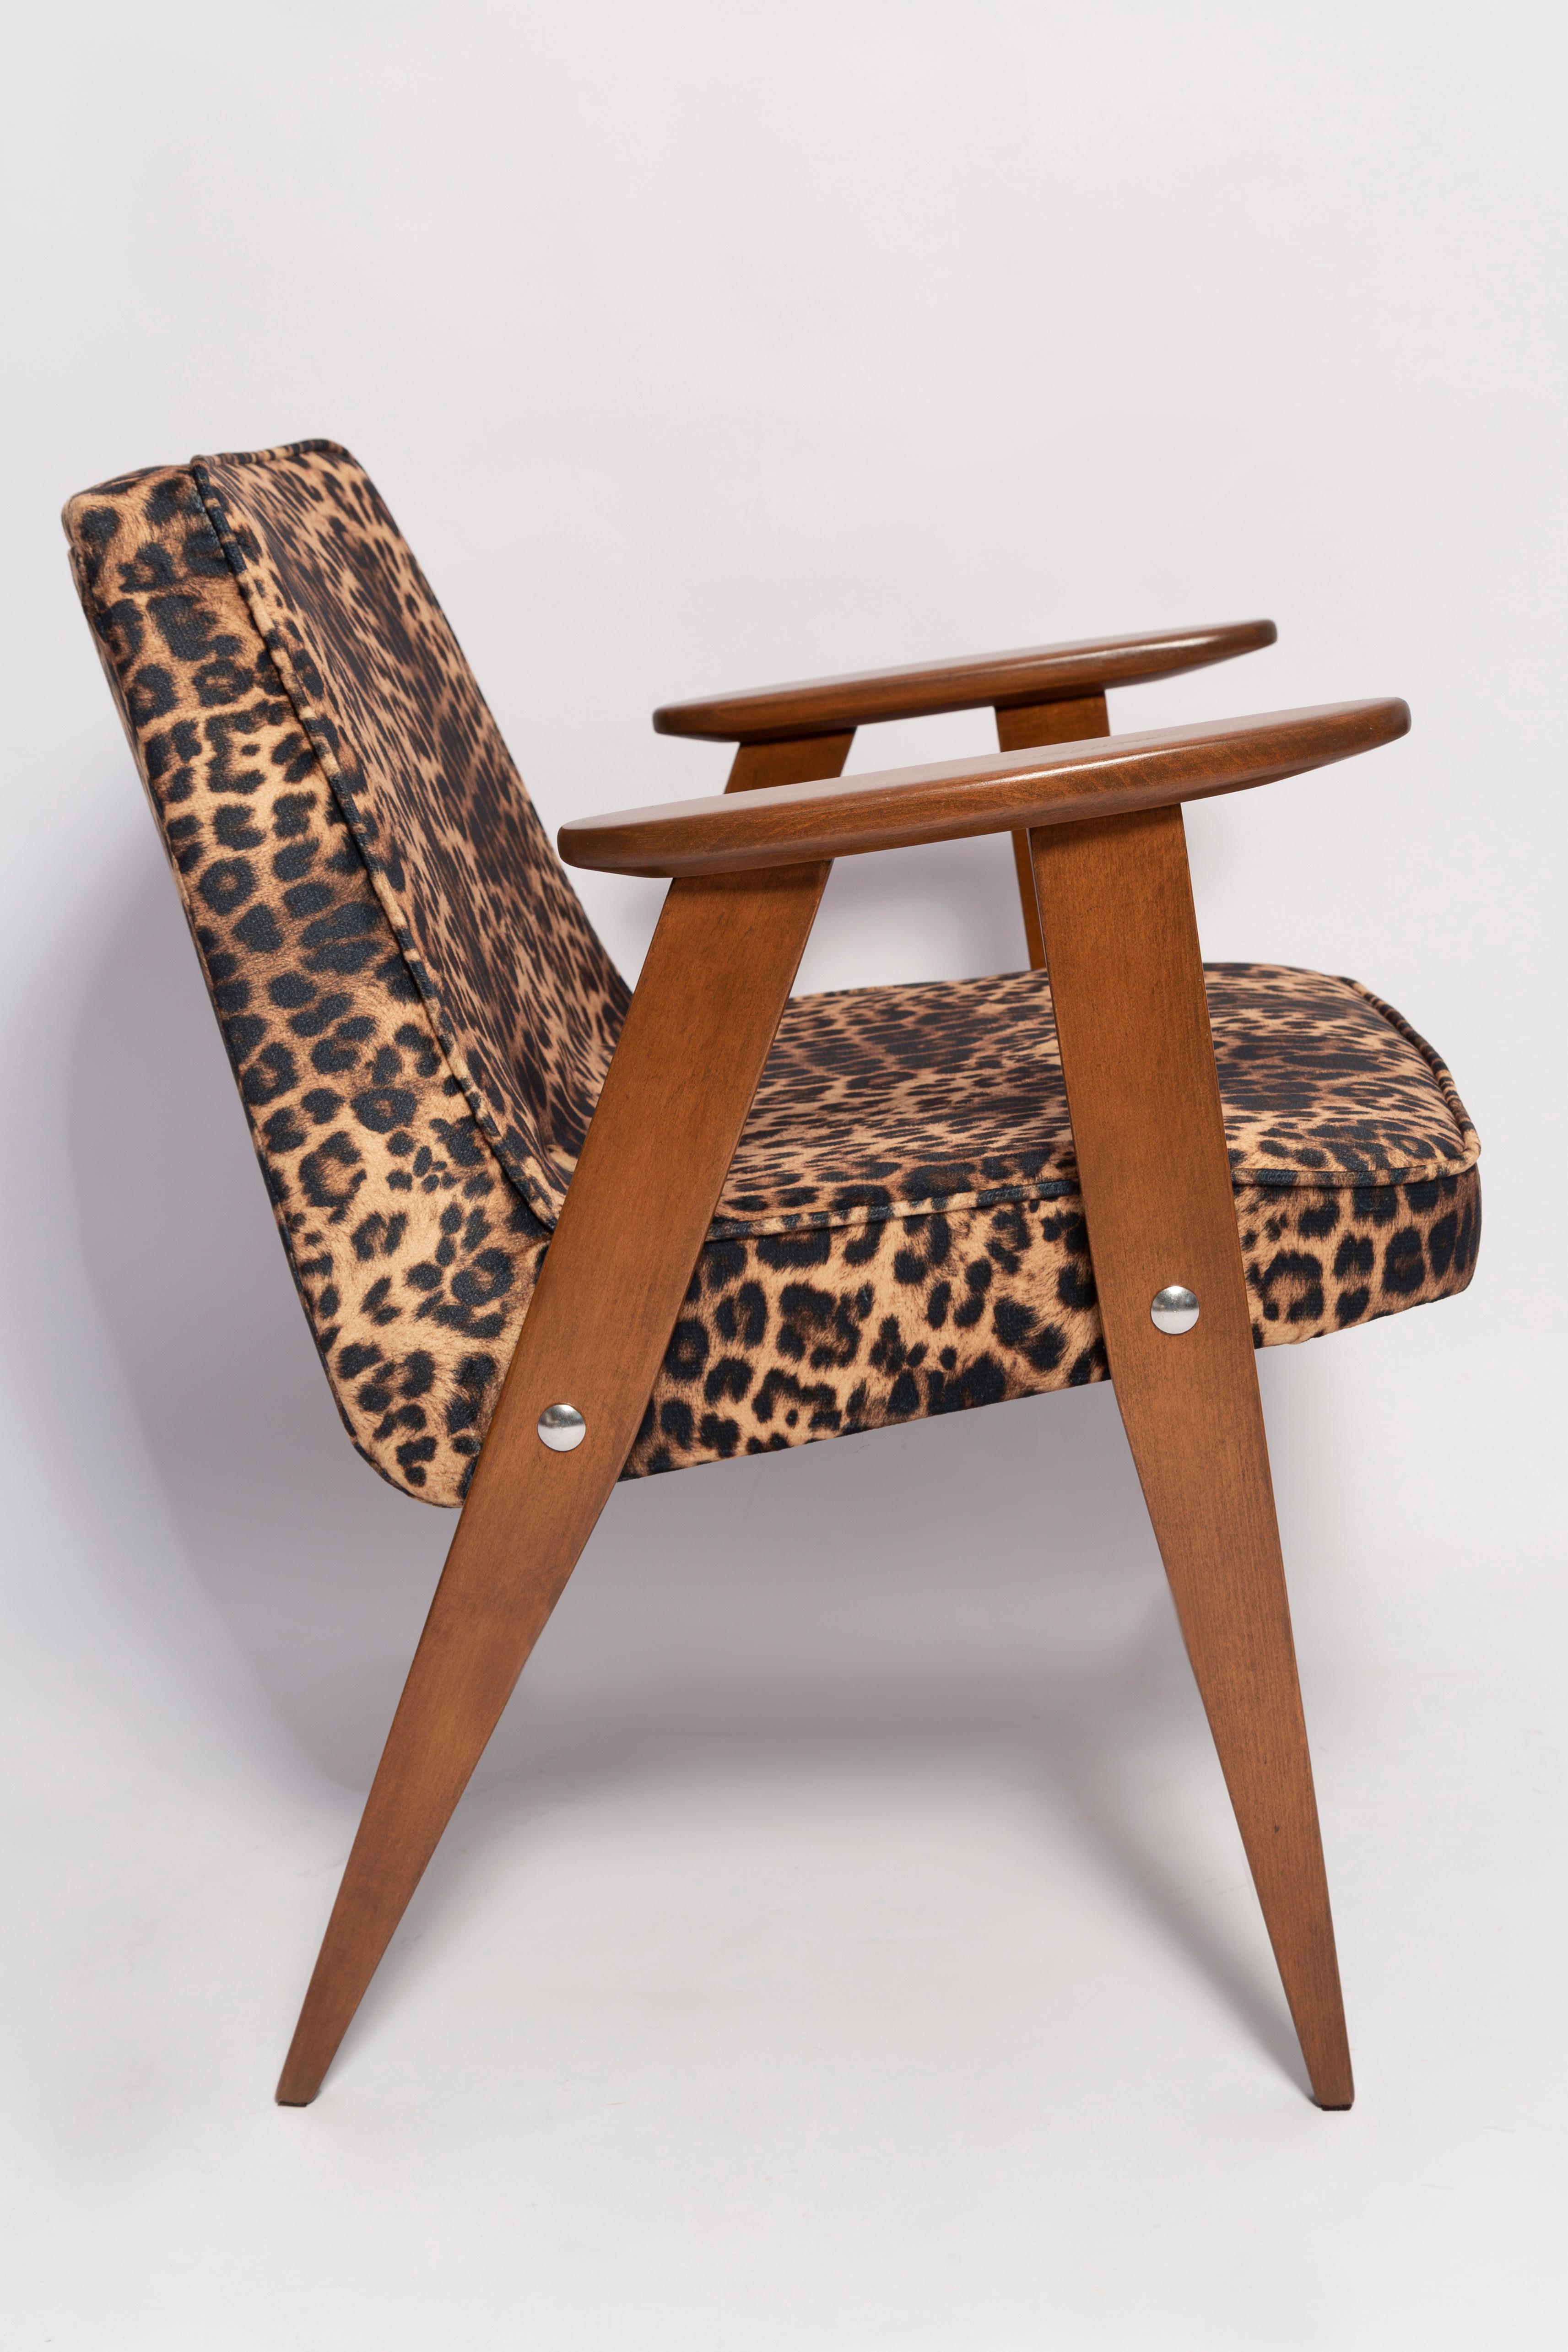 Two Mid Century 366 Armchairs in Leopard Print Velvet, Jozef Chierowski, 1960s For Sale 1